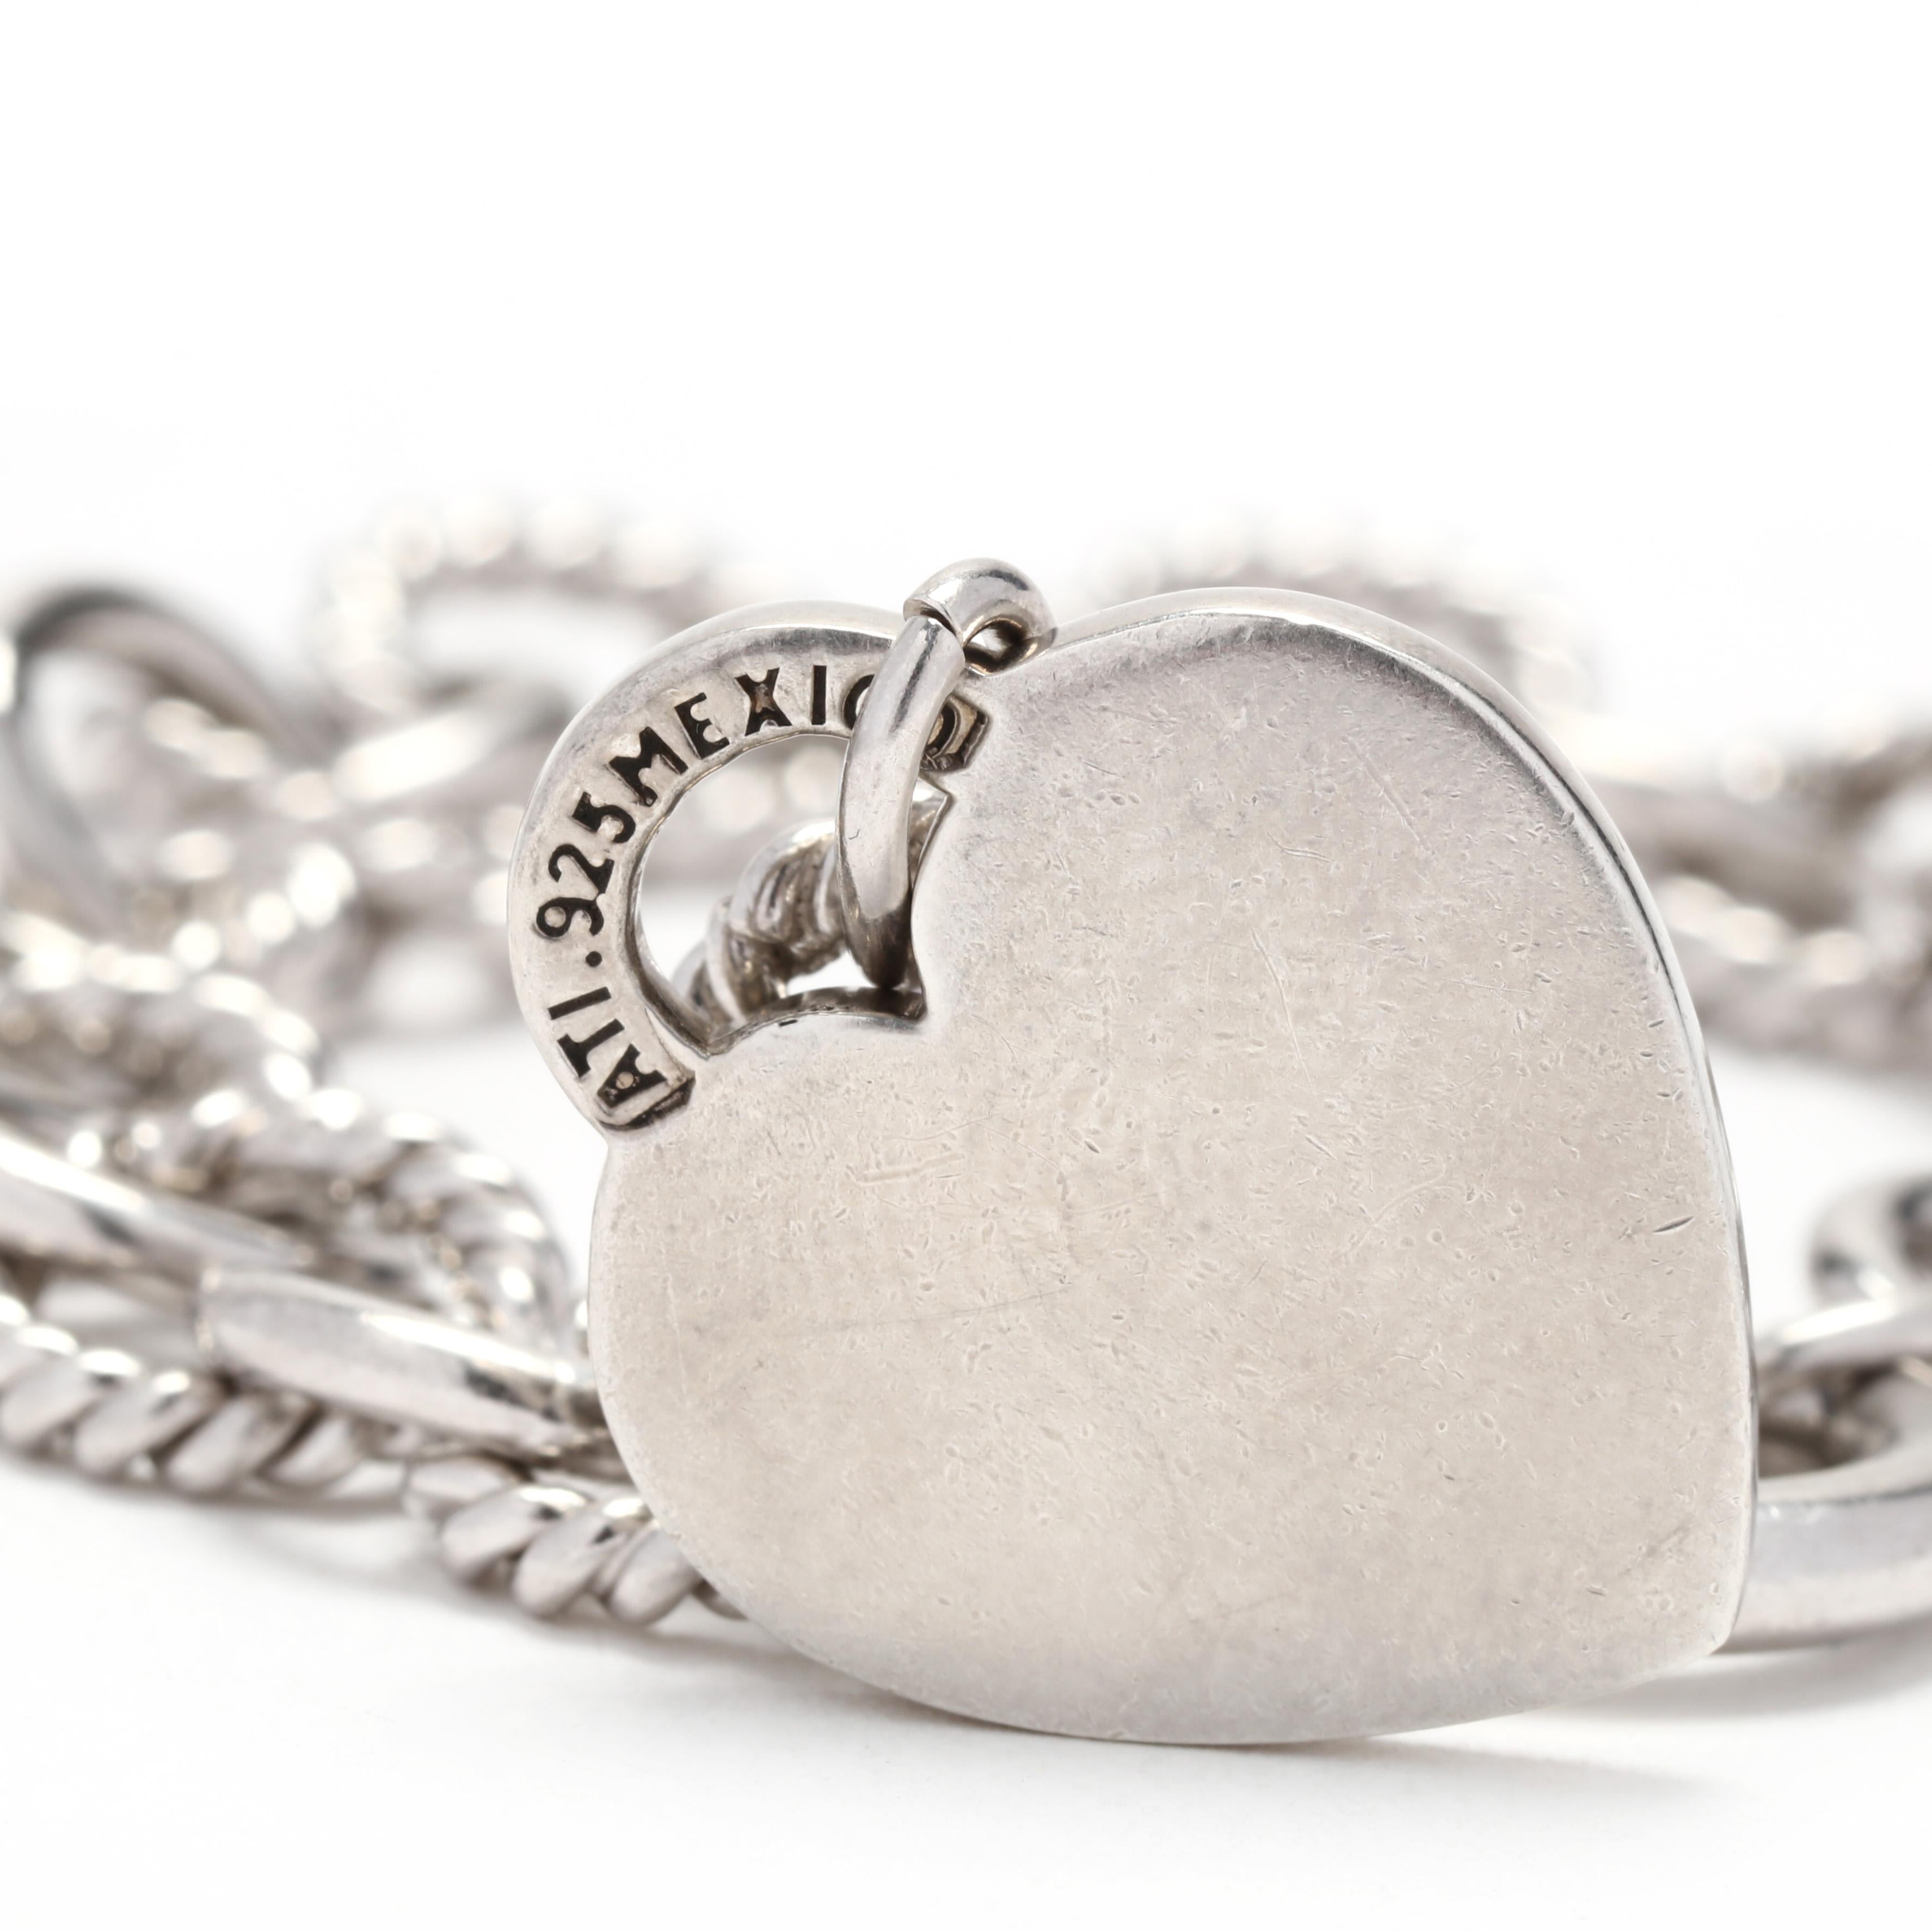 A sterling silver oval link heart charm bracelet.  This bracelet features alternating polished and rope twist oval links and a heart-shaped lock motif charm.  It is completed with a bold spring ring clasp.  The charm is stamped ATI 925